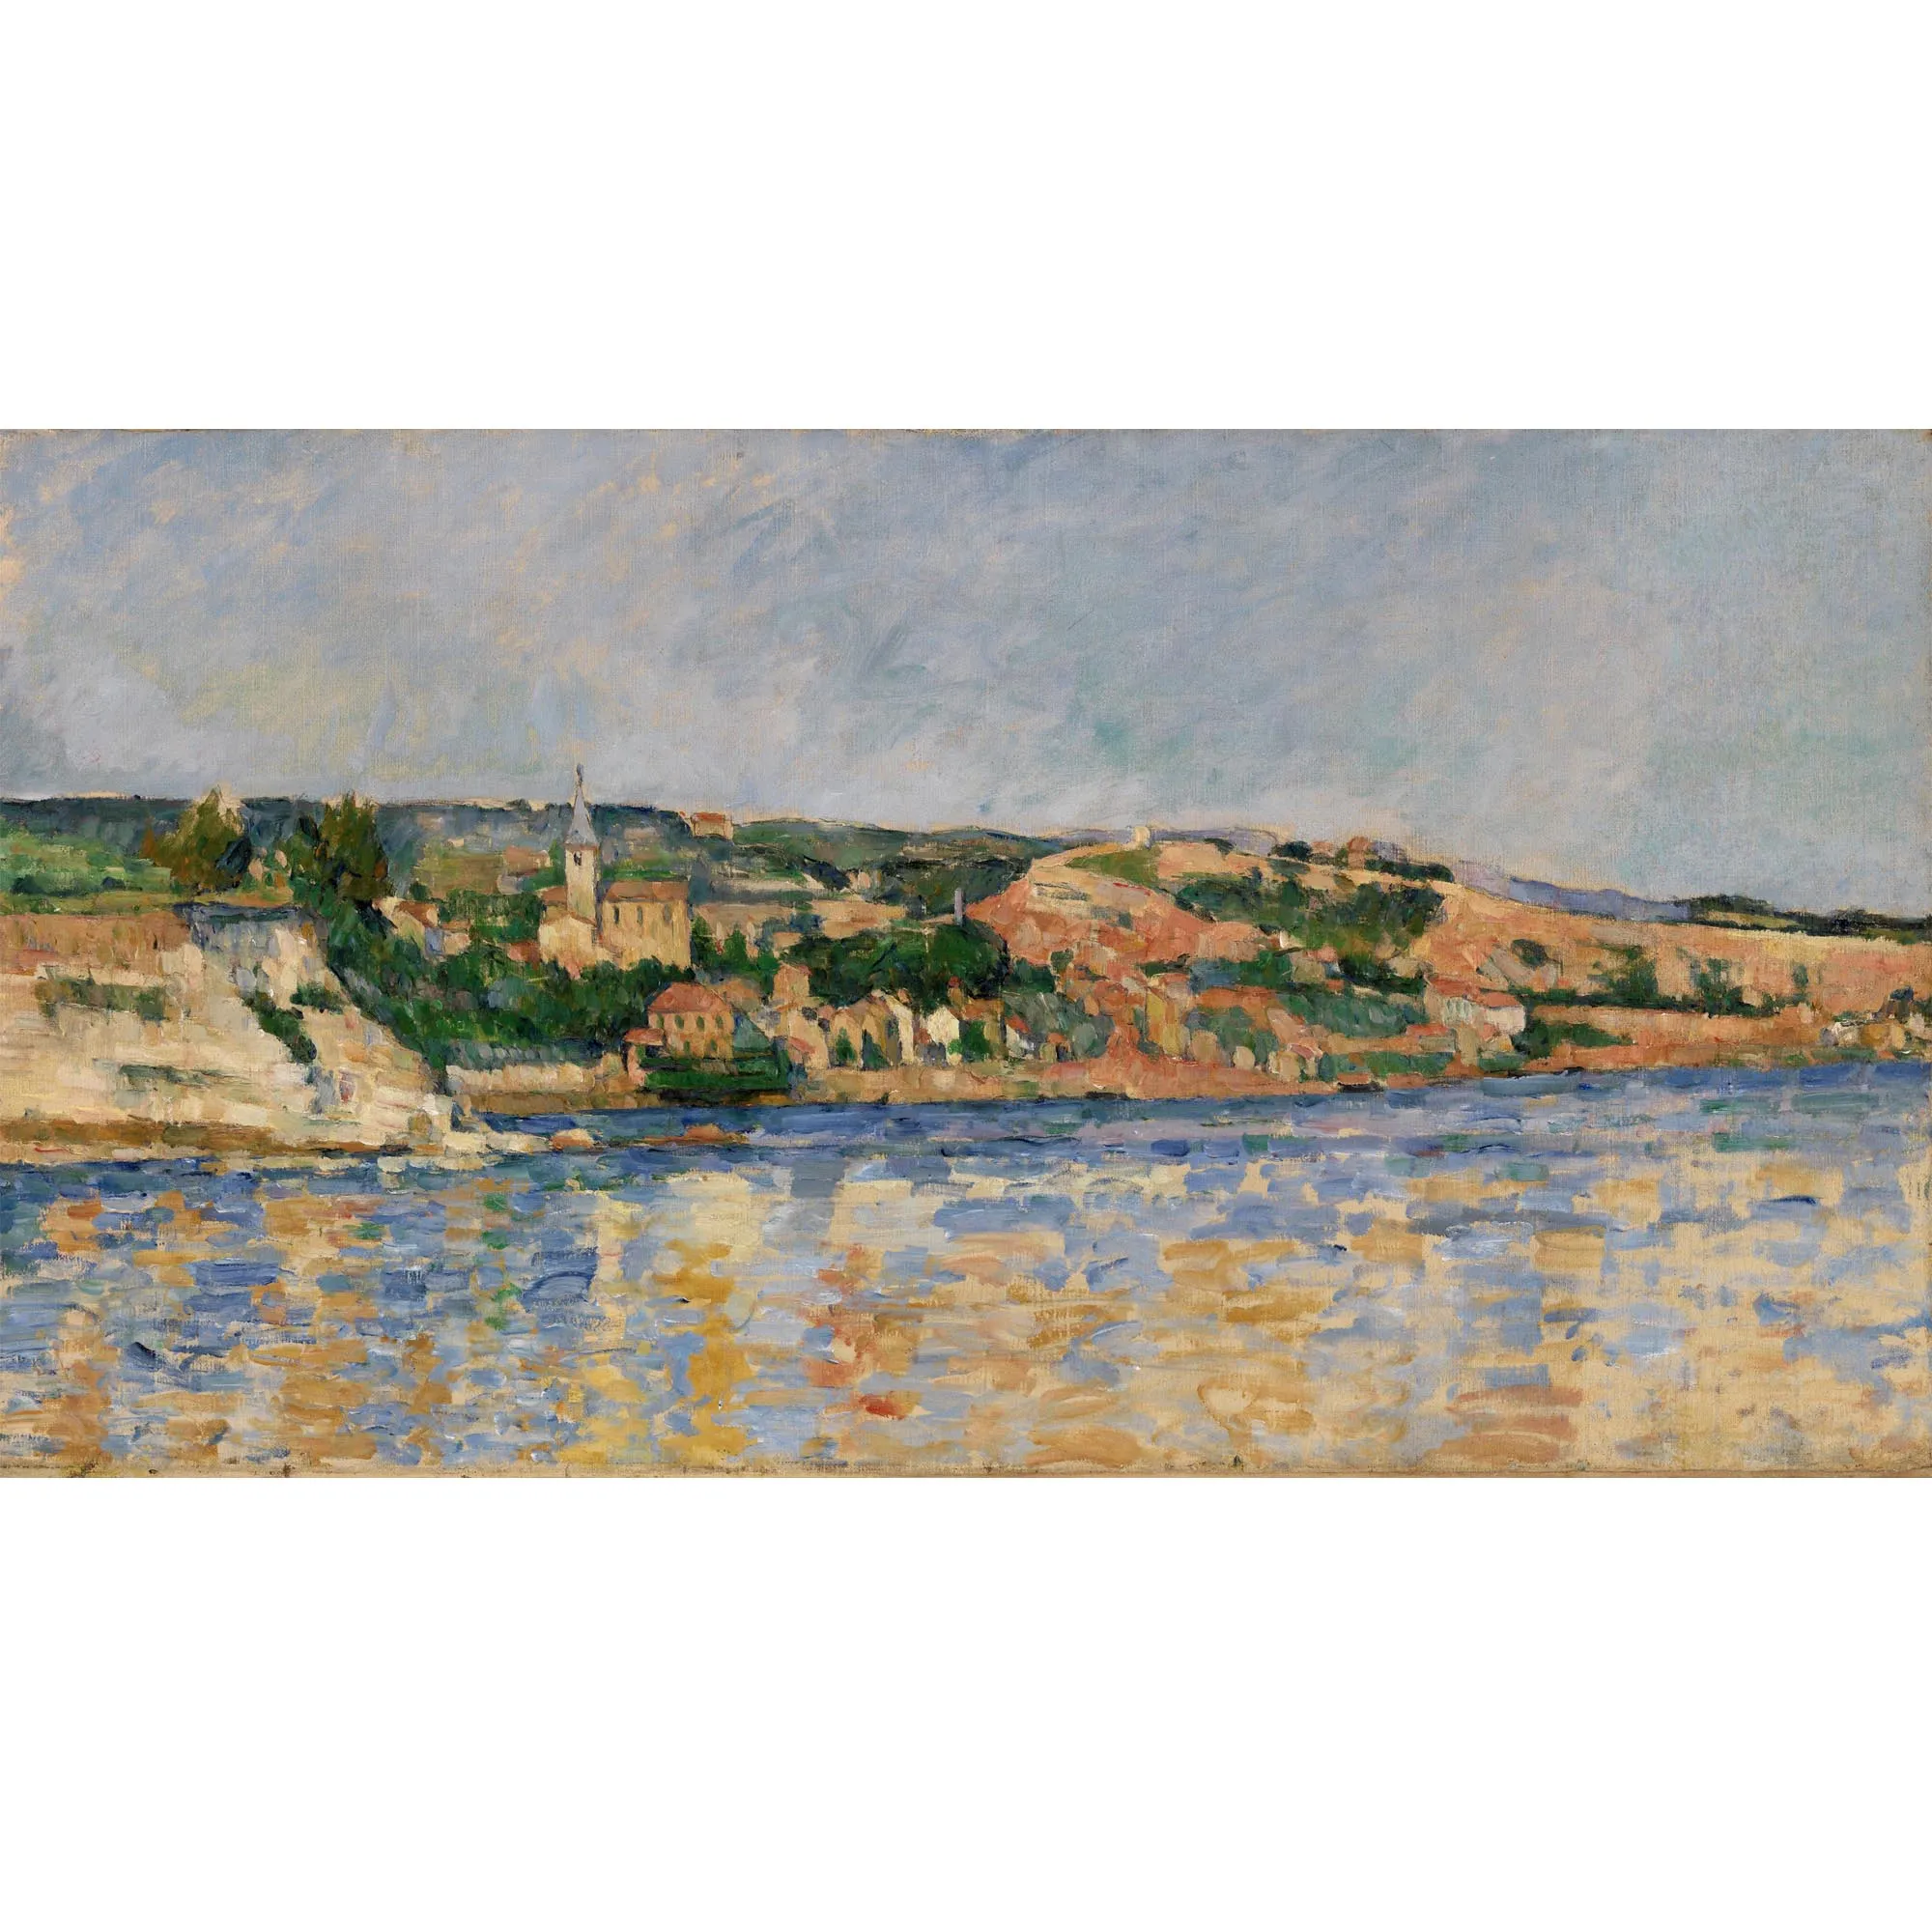 

Village at the Water's Edge by Paul Cezanne Hand painted landscape oil painting on canvas Famous oil painting reproduction